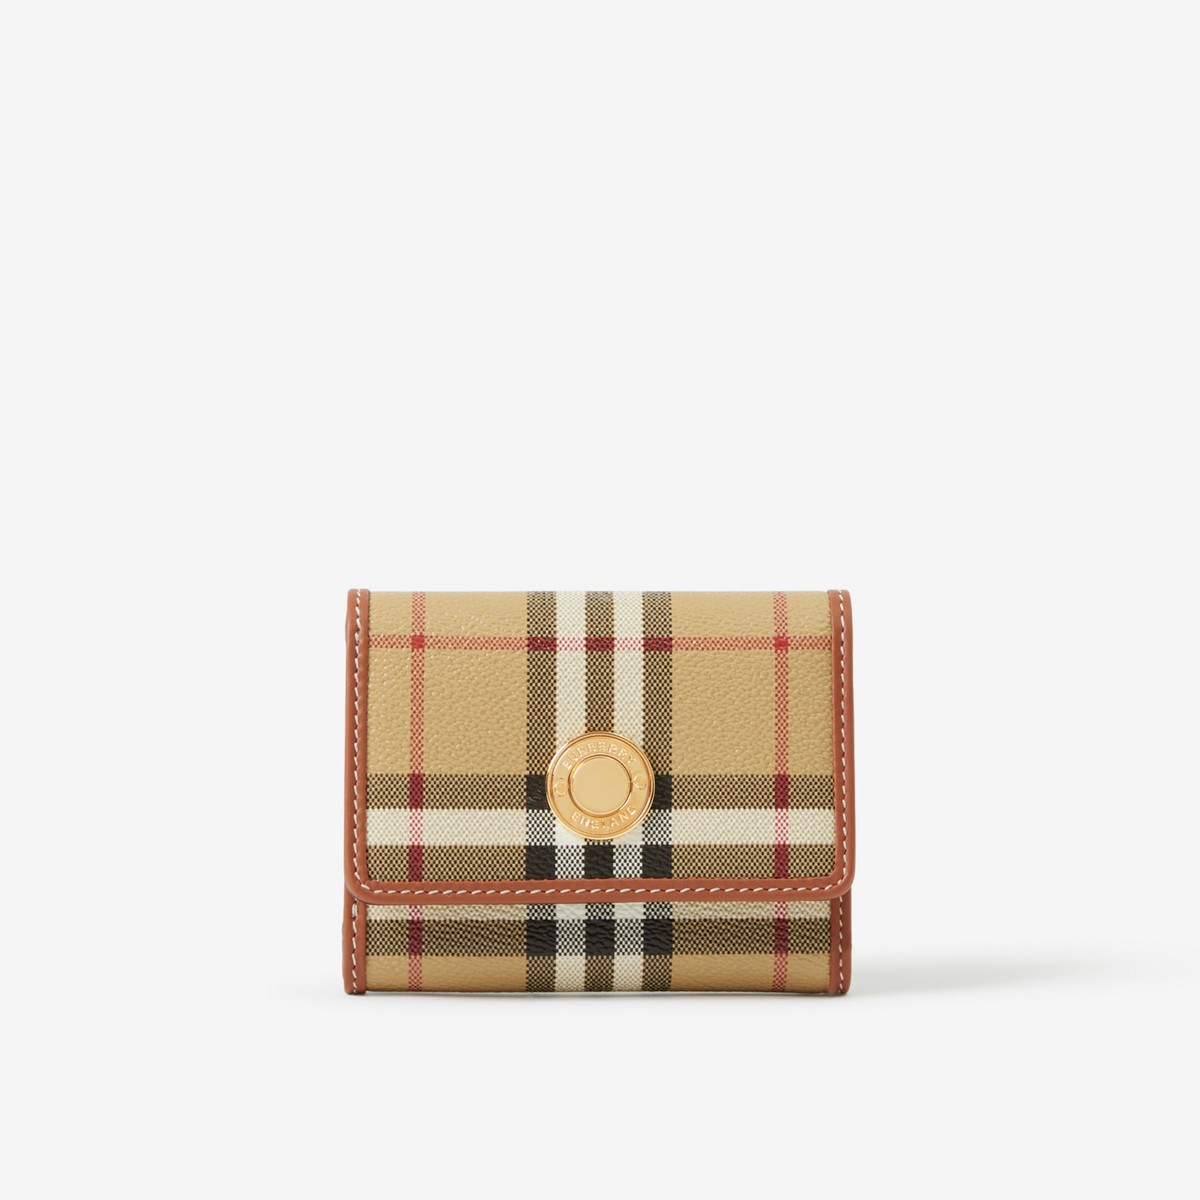 Burberry Check And Leather Small Folding Wallet In Archive Beige